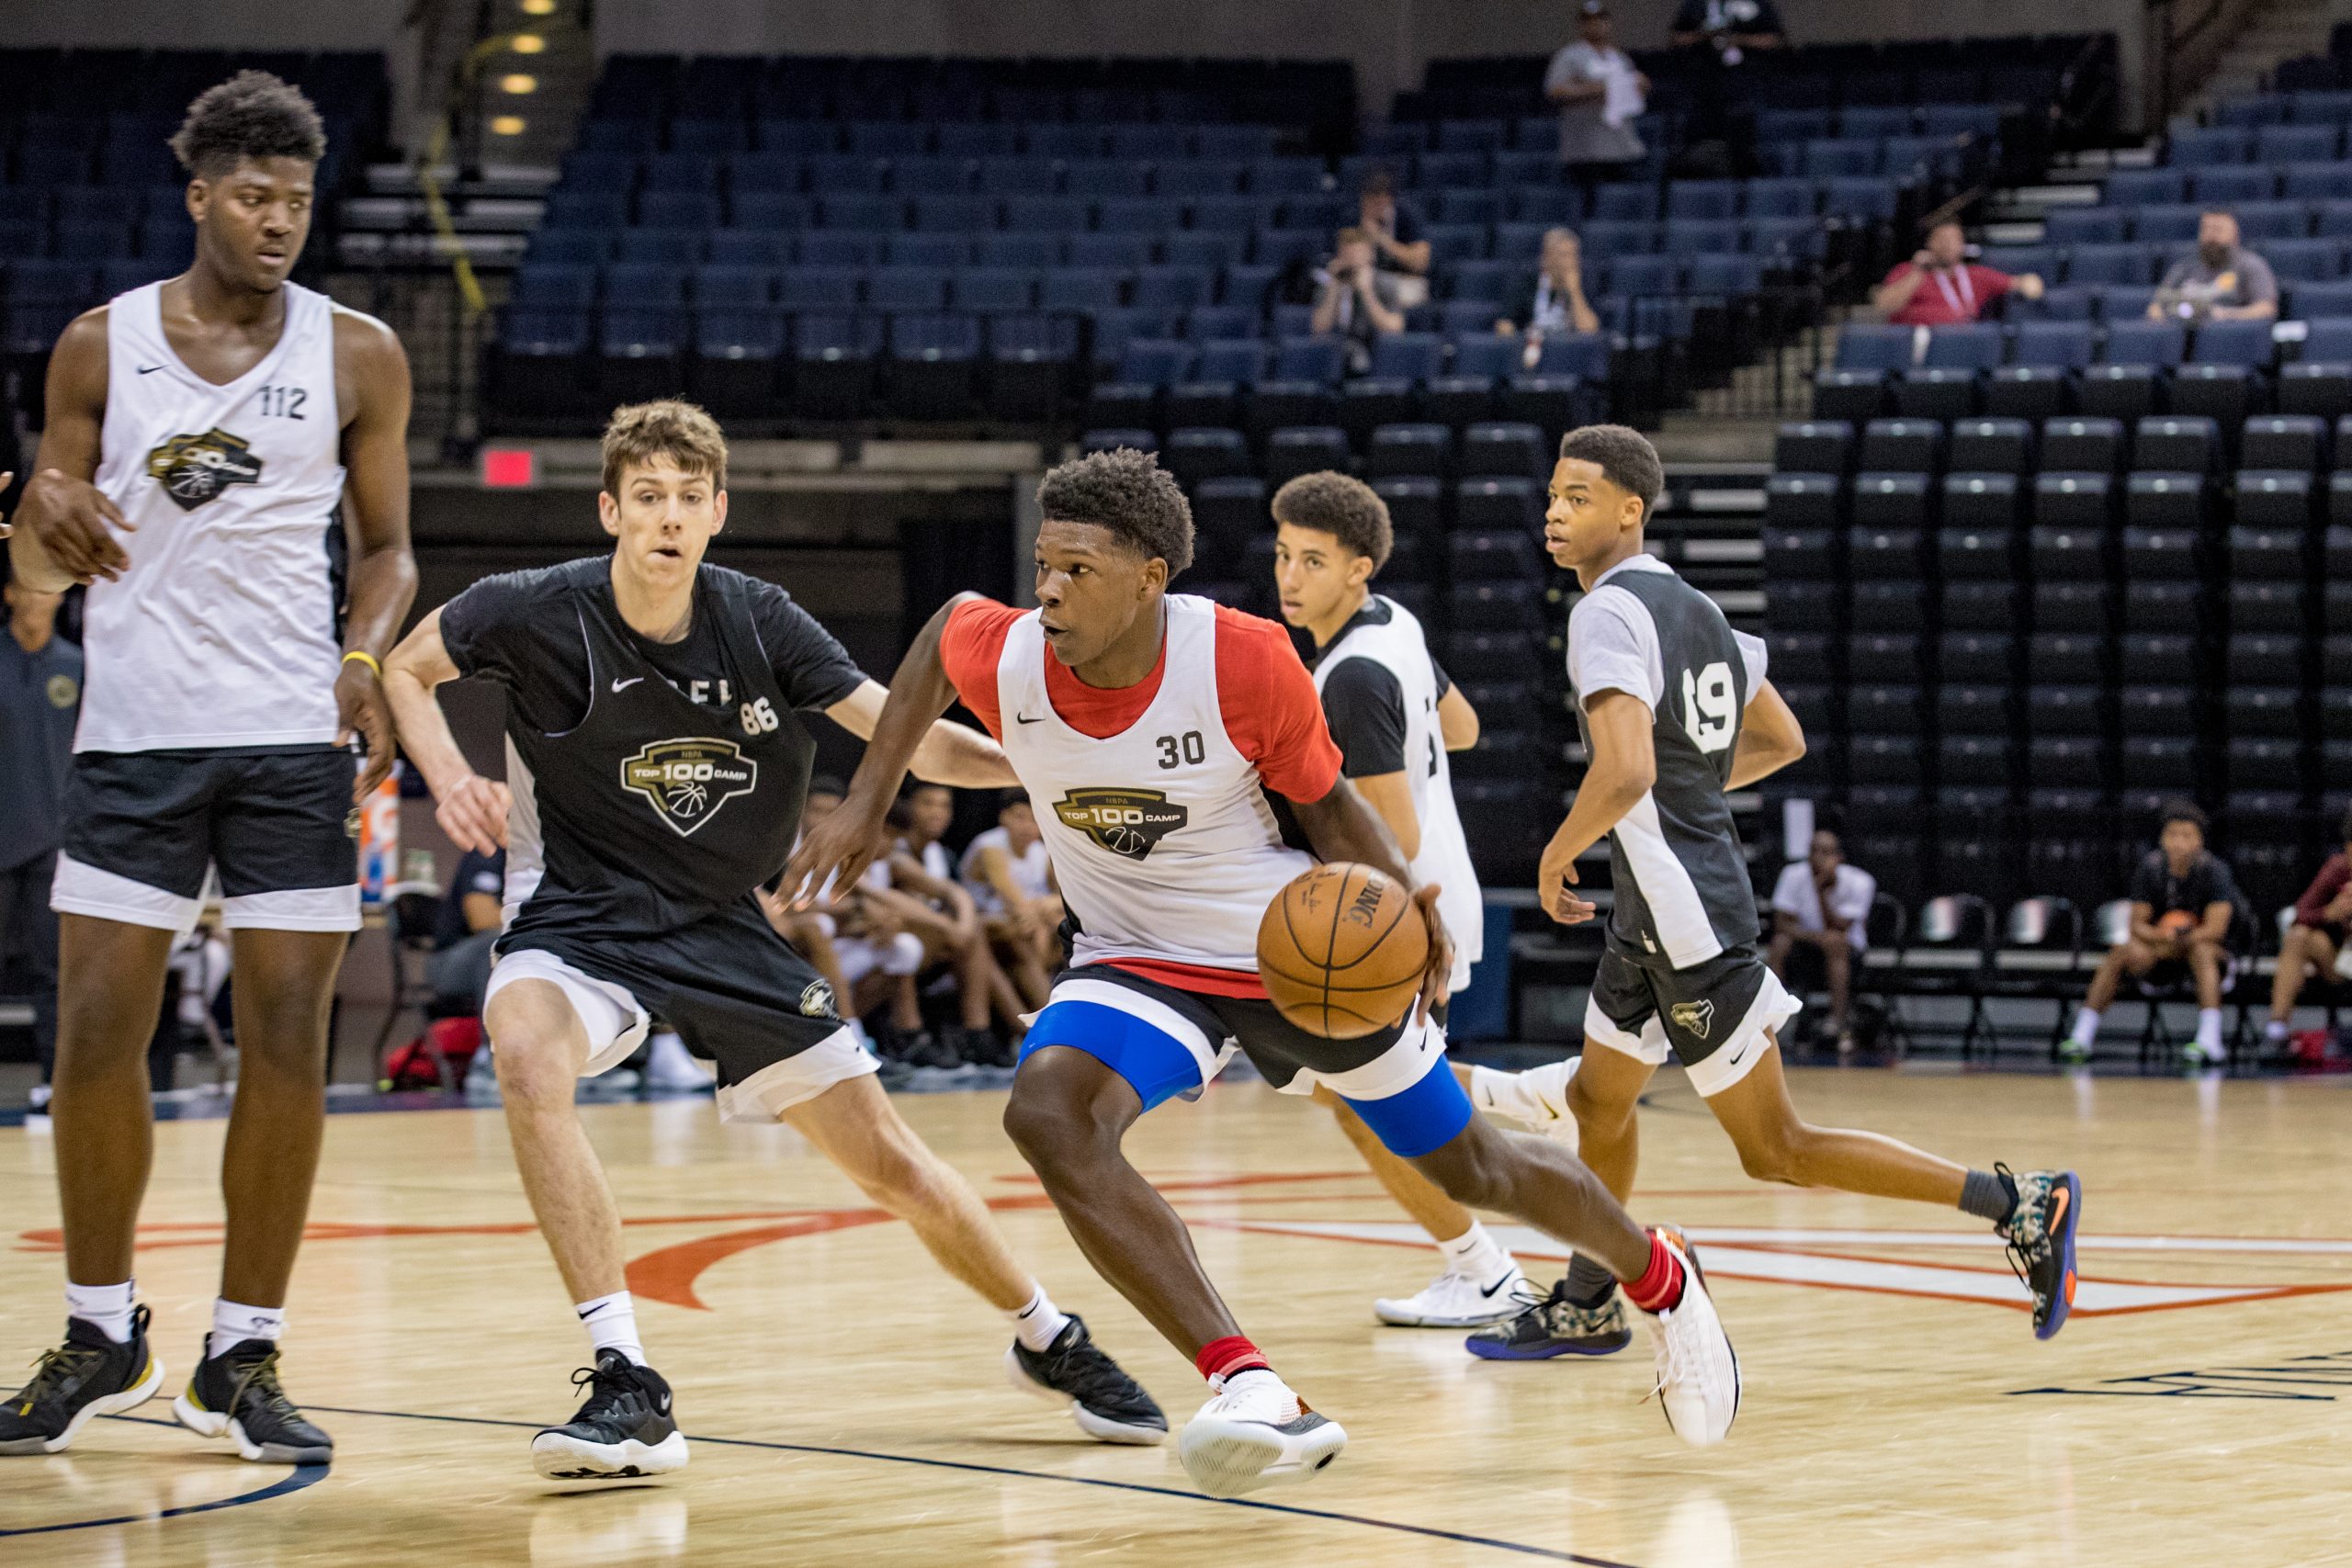 KSR's final takeaways from the 2022 NBPA Top 100 Camp - On3